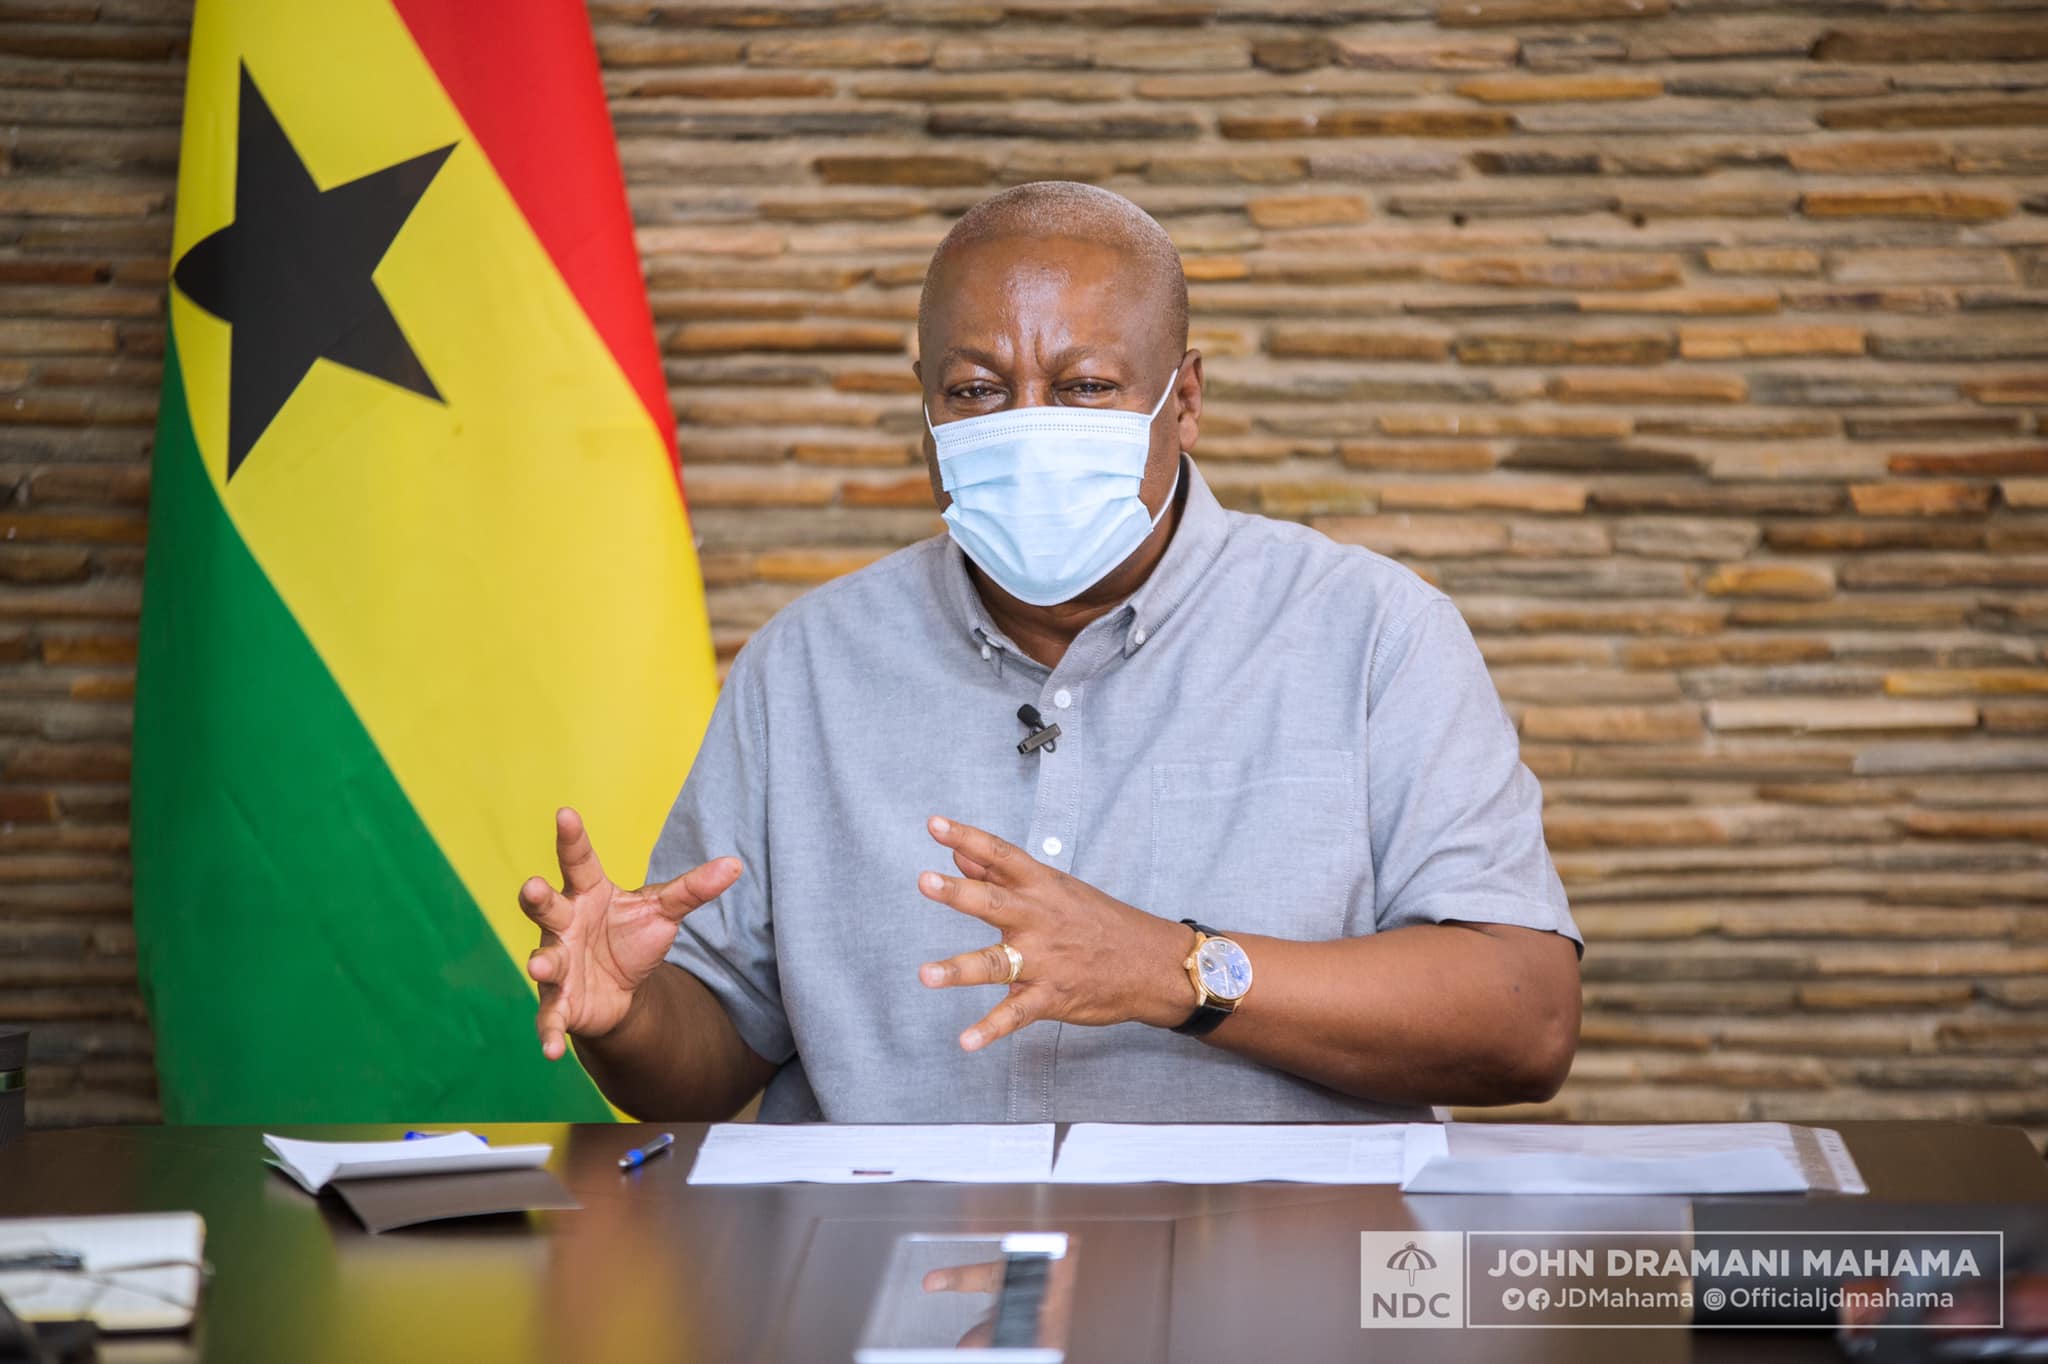 Mahama accuses Akufo-Addo of discriminatory use of military in voter registration